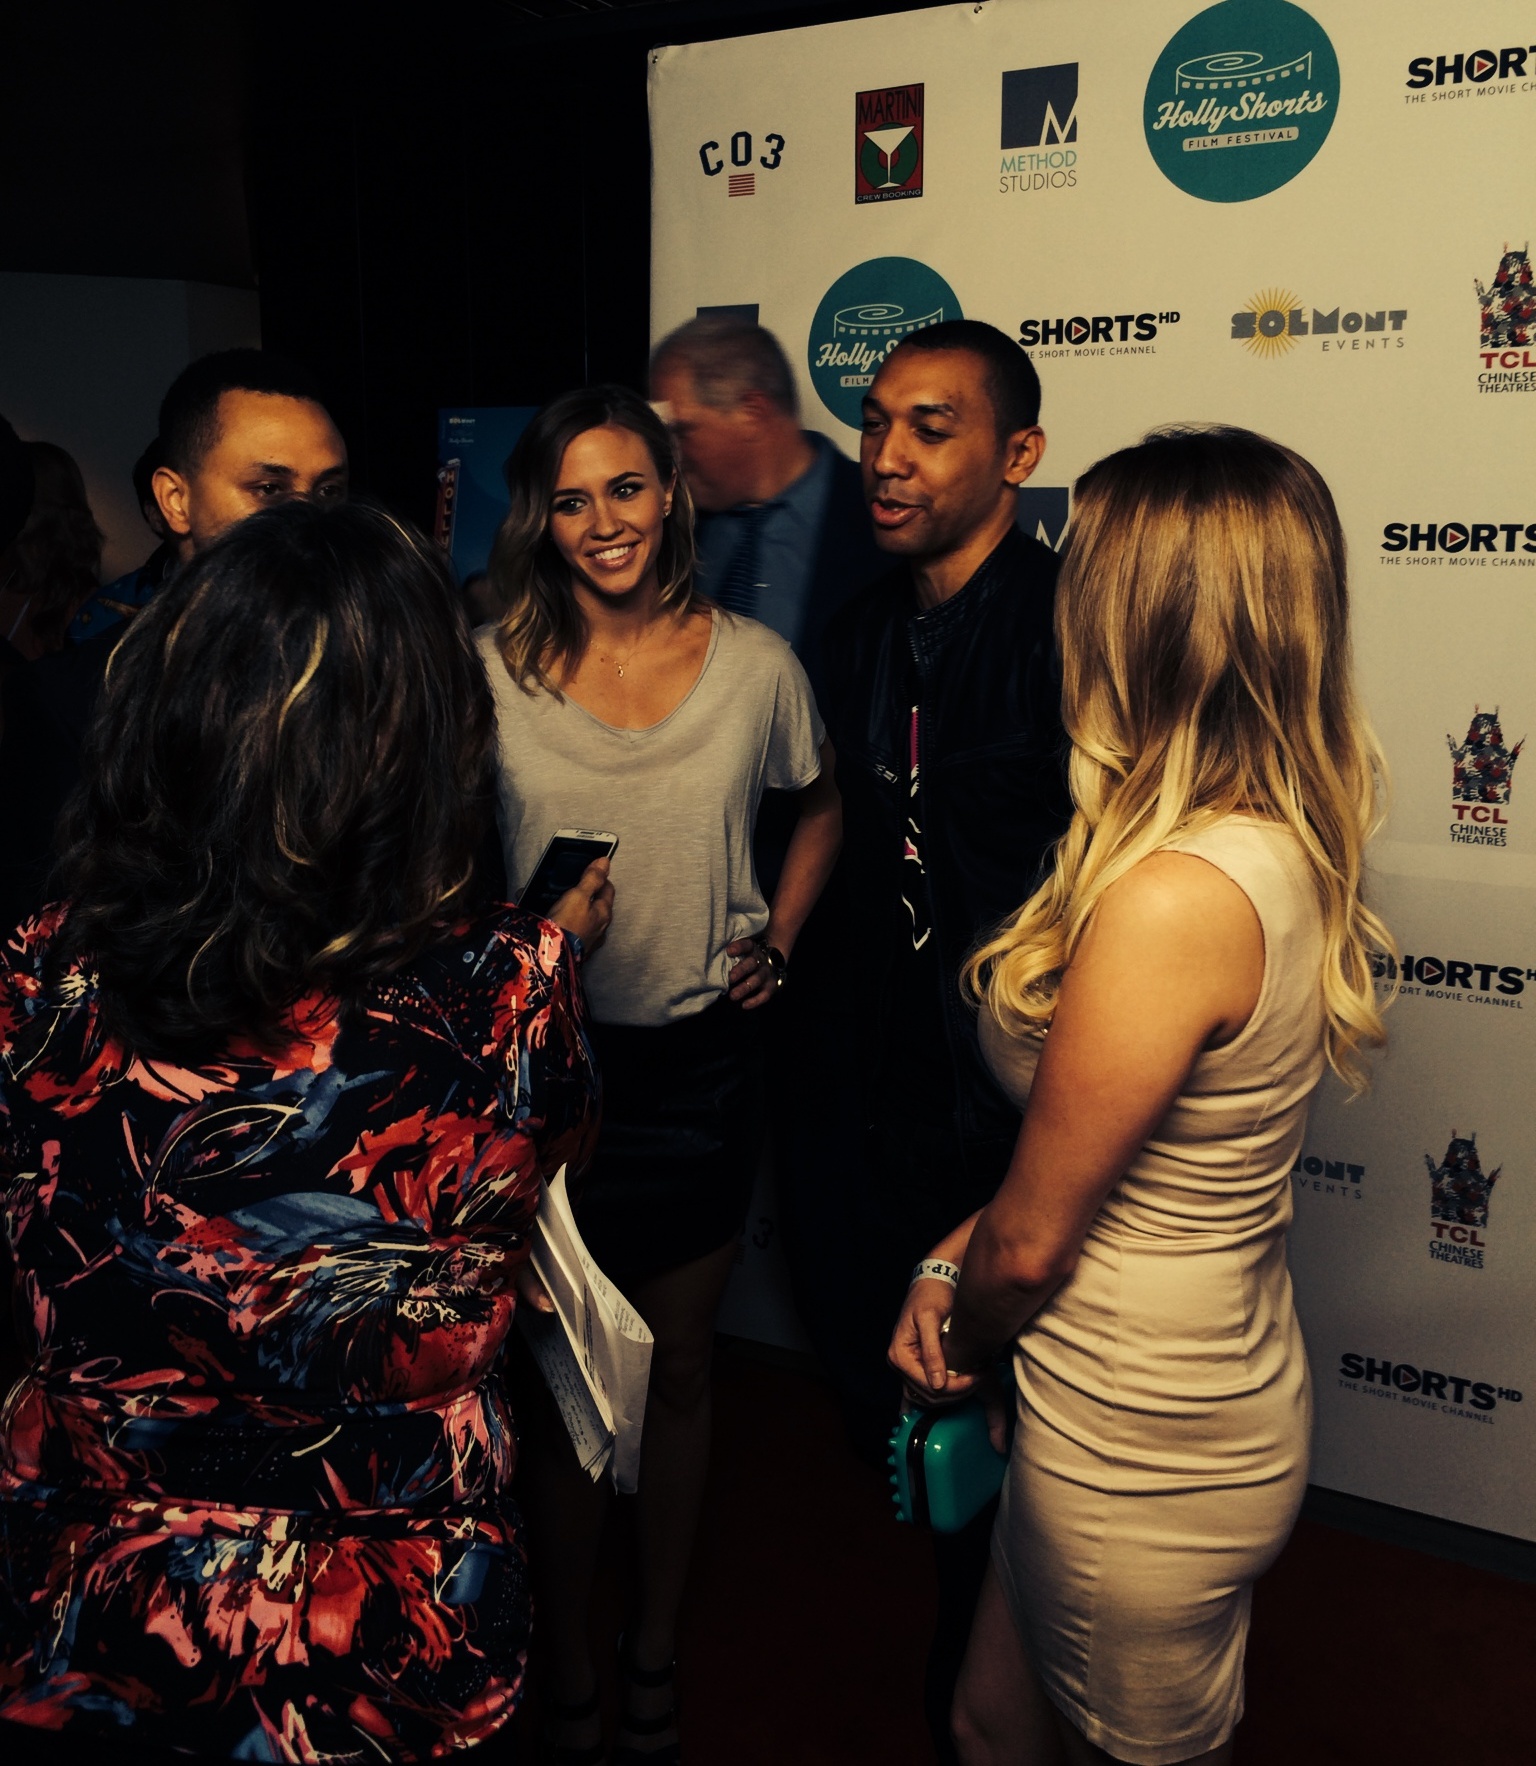 Holly Shorts Film Festival 2014 Actress Aqueela Zoll and Director Jejuan Guillory talk about their film 'Crazy Charlie'